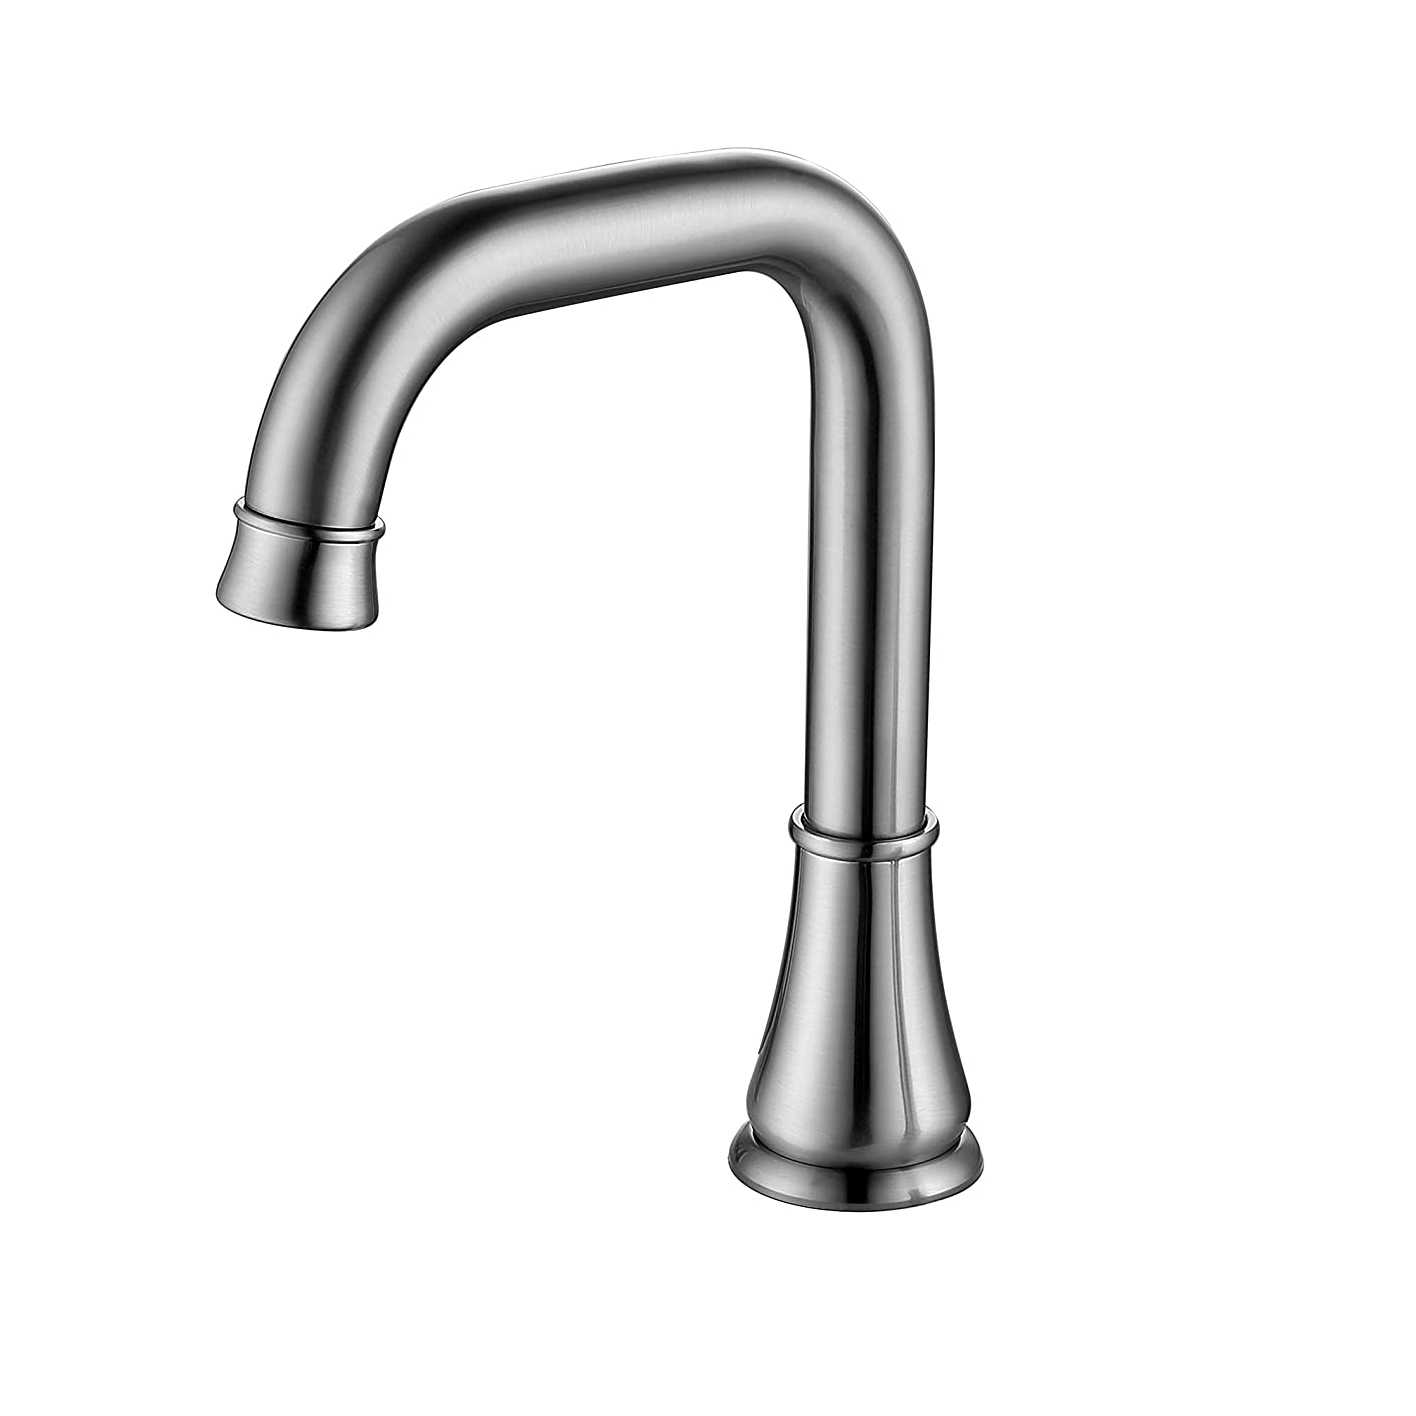 Fontana Commercial Brushed Nickel Touchless Automatic Sensor Faucets